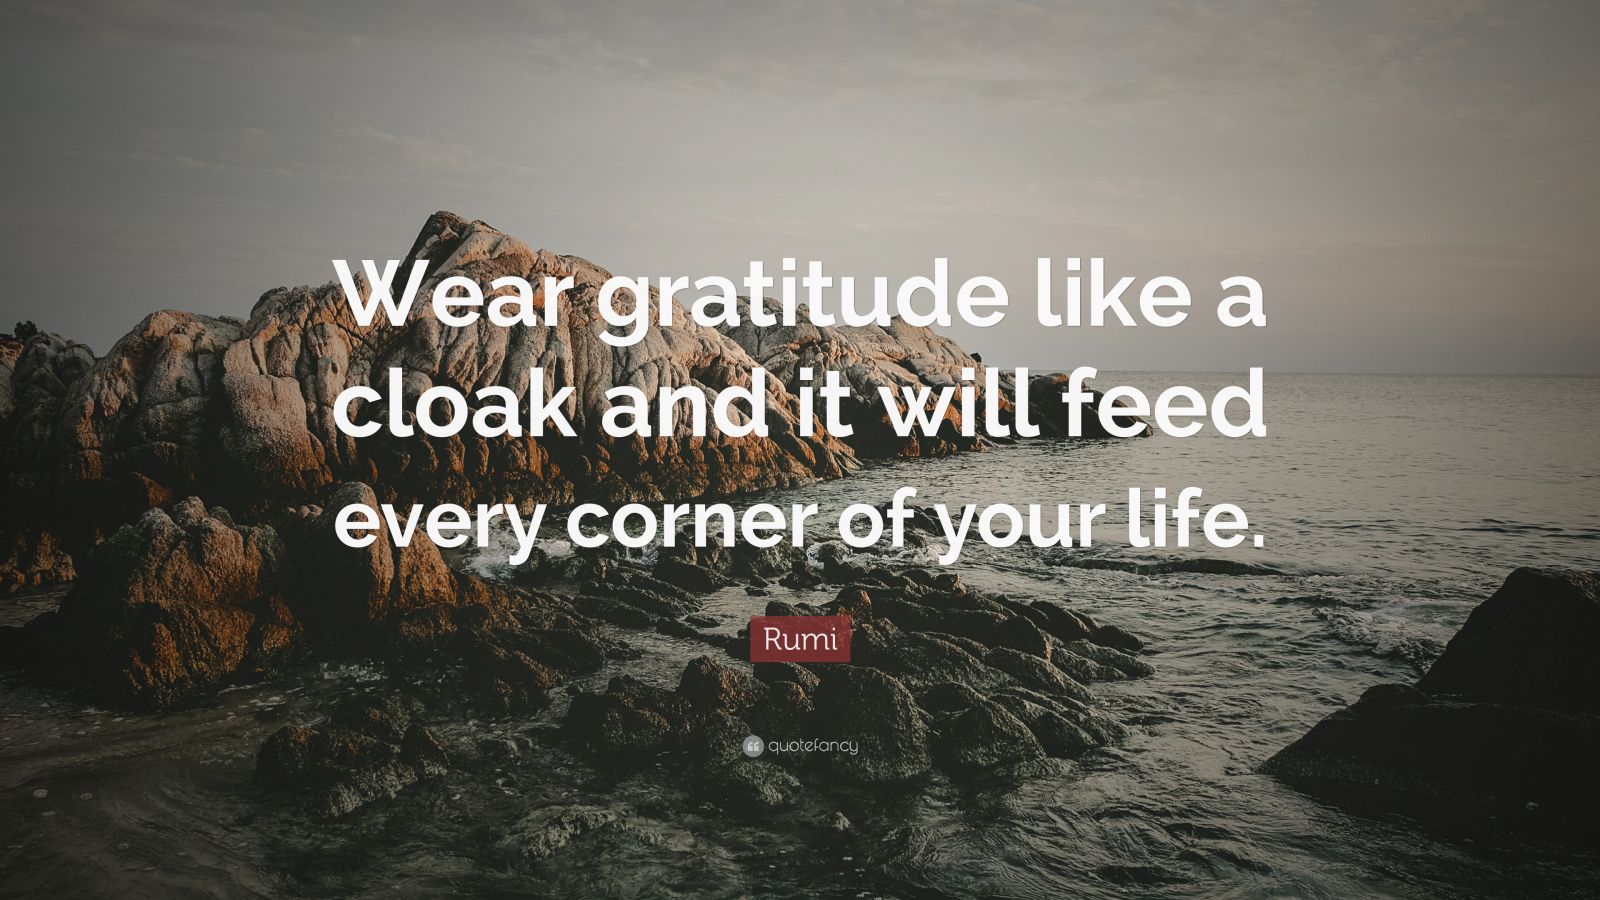 Rumi Quote: “Wear gratitude like a cloak and it will feed every corner